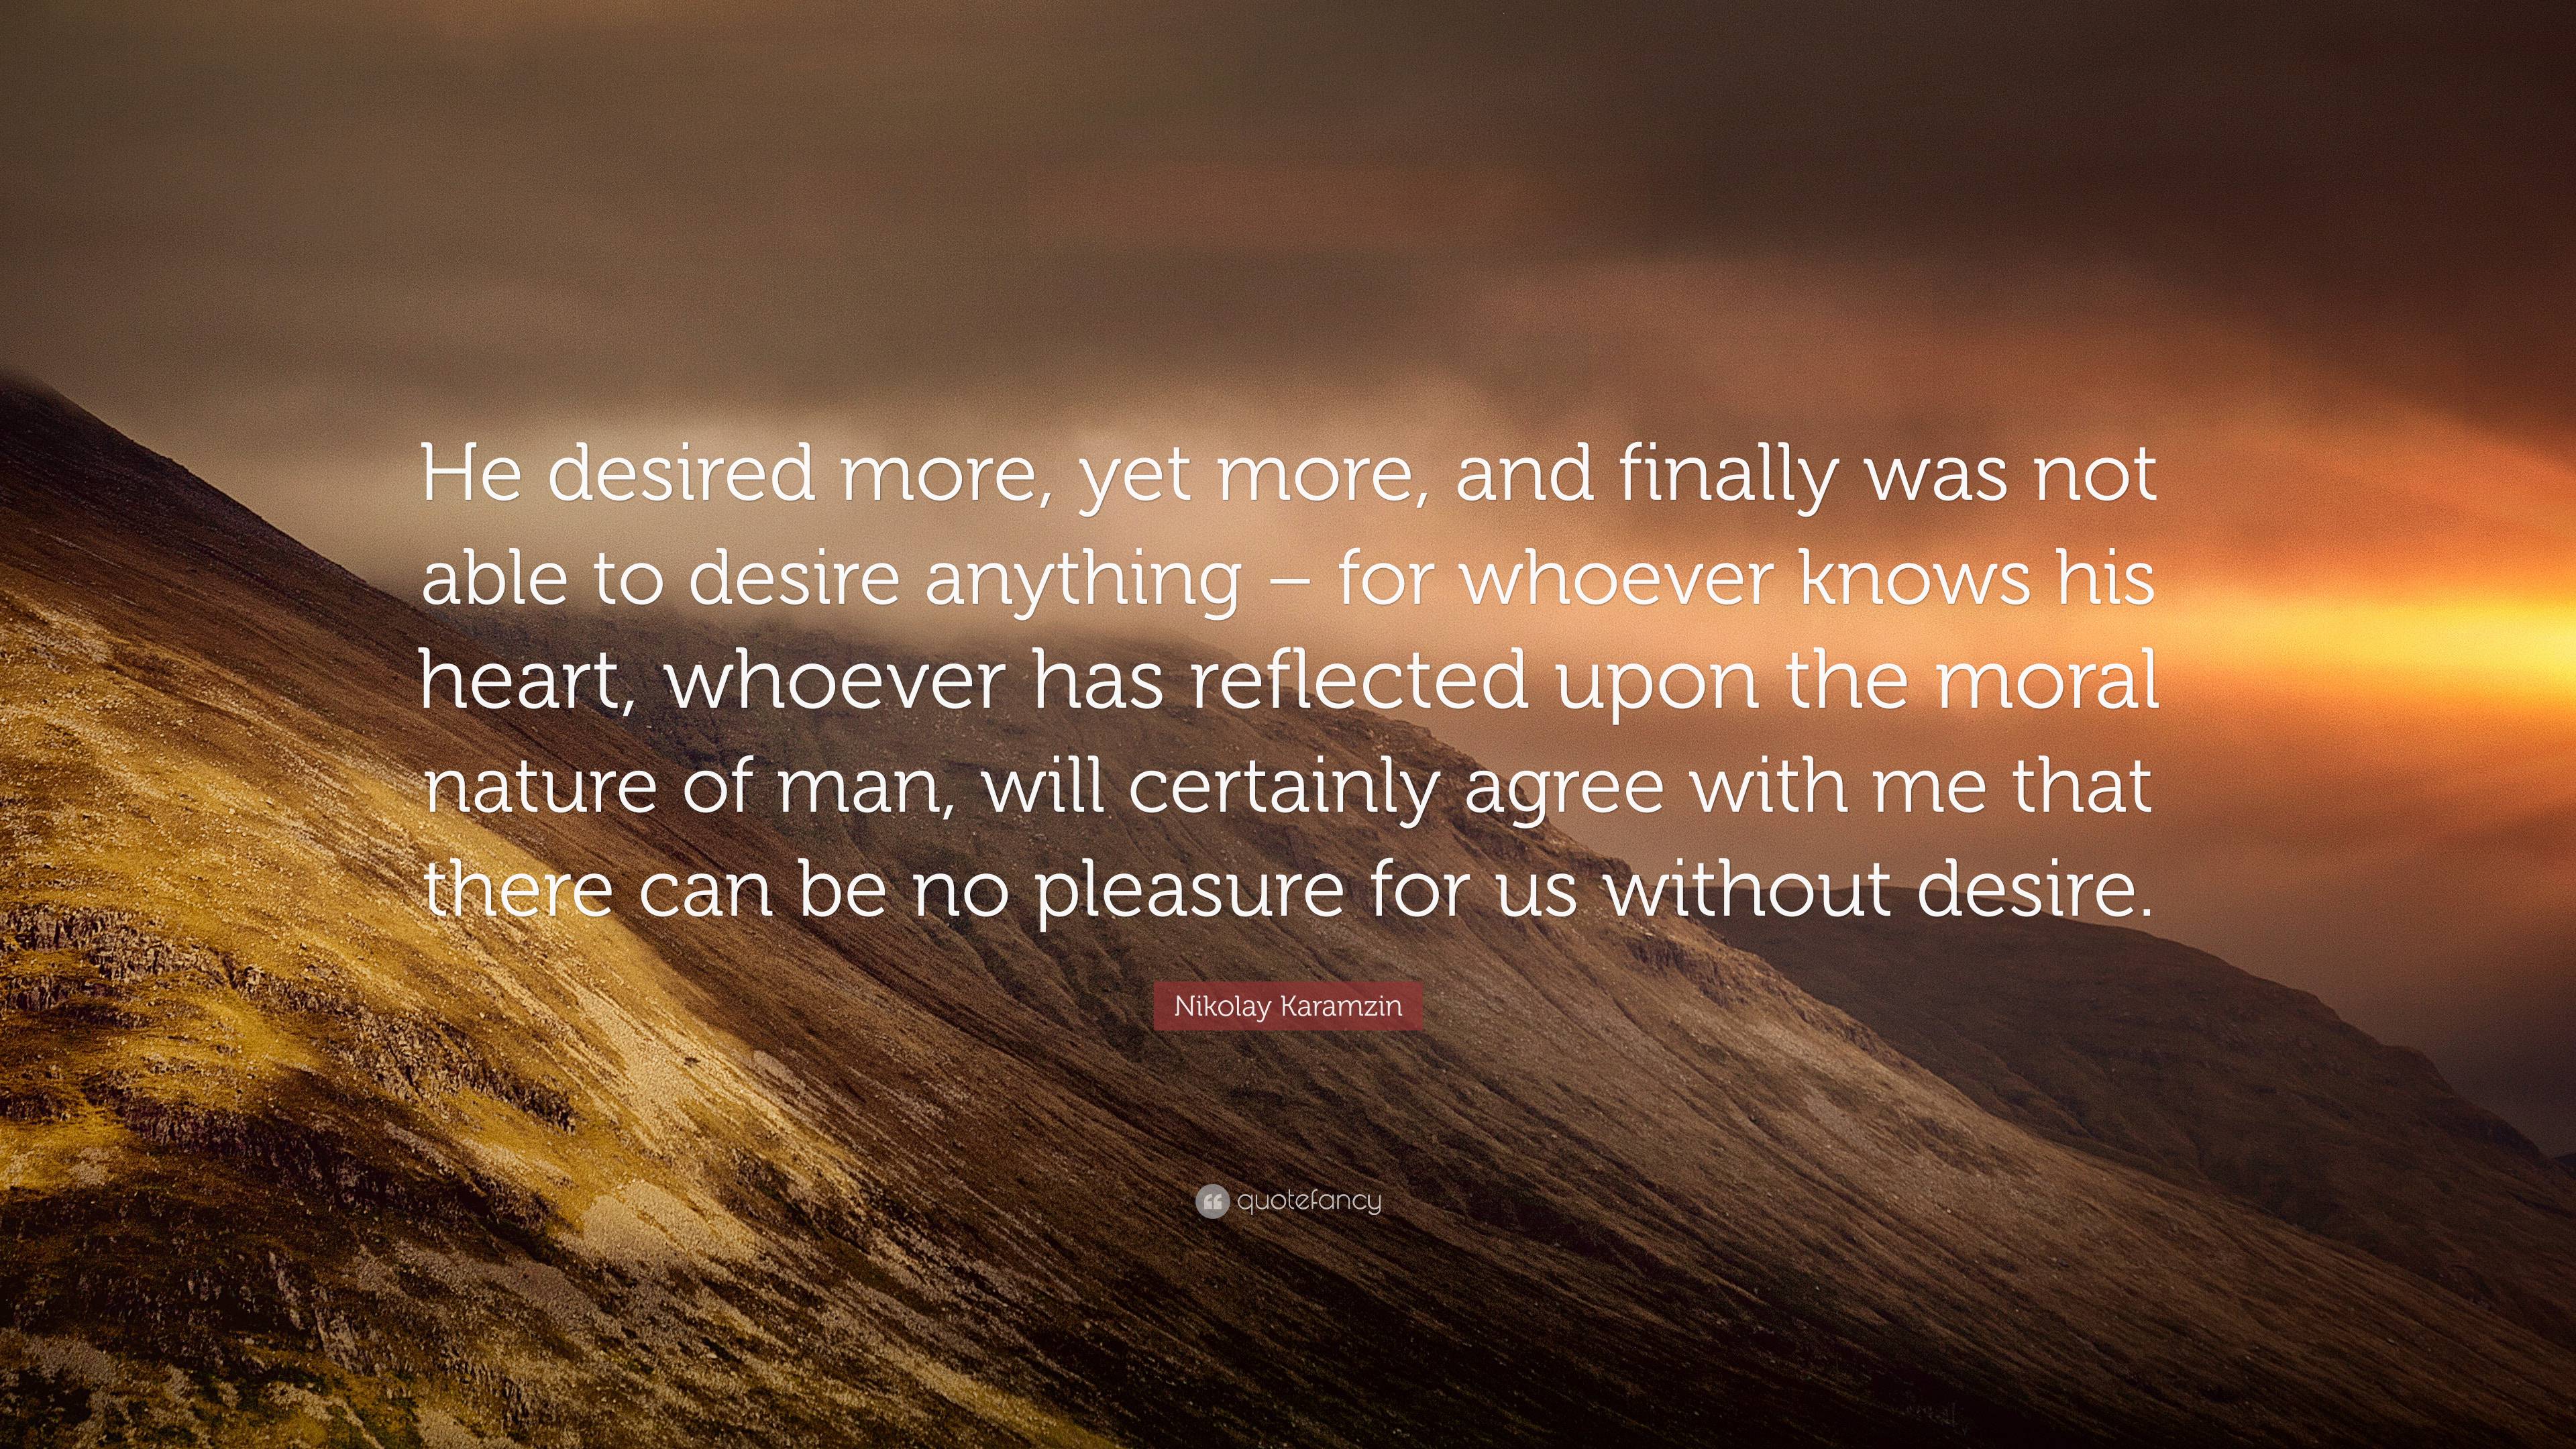 Nikolay Karamzin Quote: “He desired more, yet more, and finally was not ...